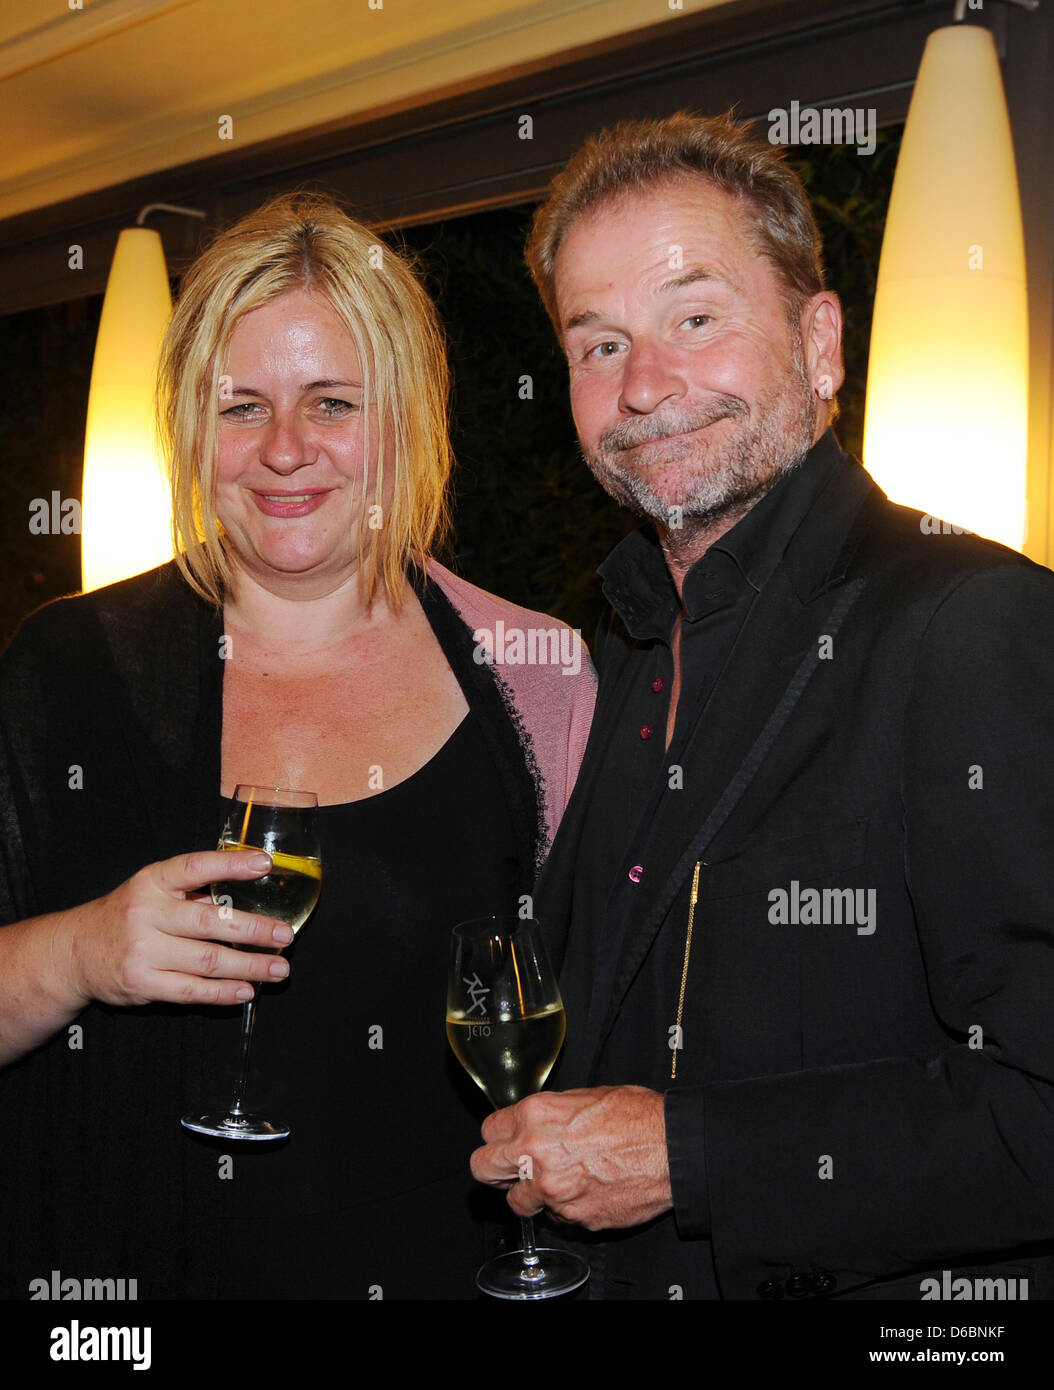 Austrian director Ulrich Seidl and his wife Veronika Franz attend a cocktail party of Film- und Medienstiftung NRW, a state funding agency of Germany's federal state Northrine Westphalia, at the restaurant Valentino at the Lido during the 69th Venice International Film Festival in Venice, Italy, 02 September 2012. Photo: Jens Kalaene dpa Stock Photo